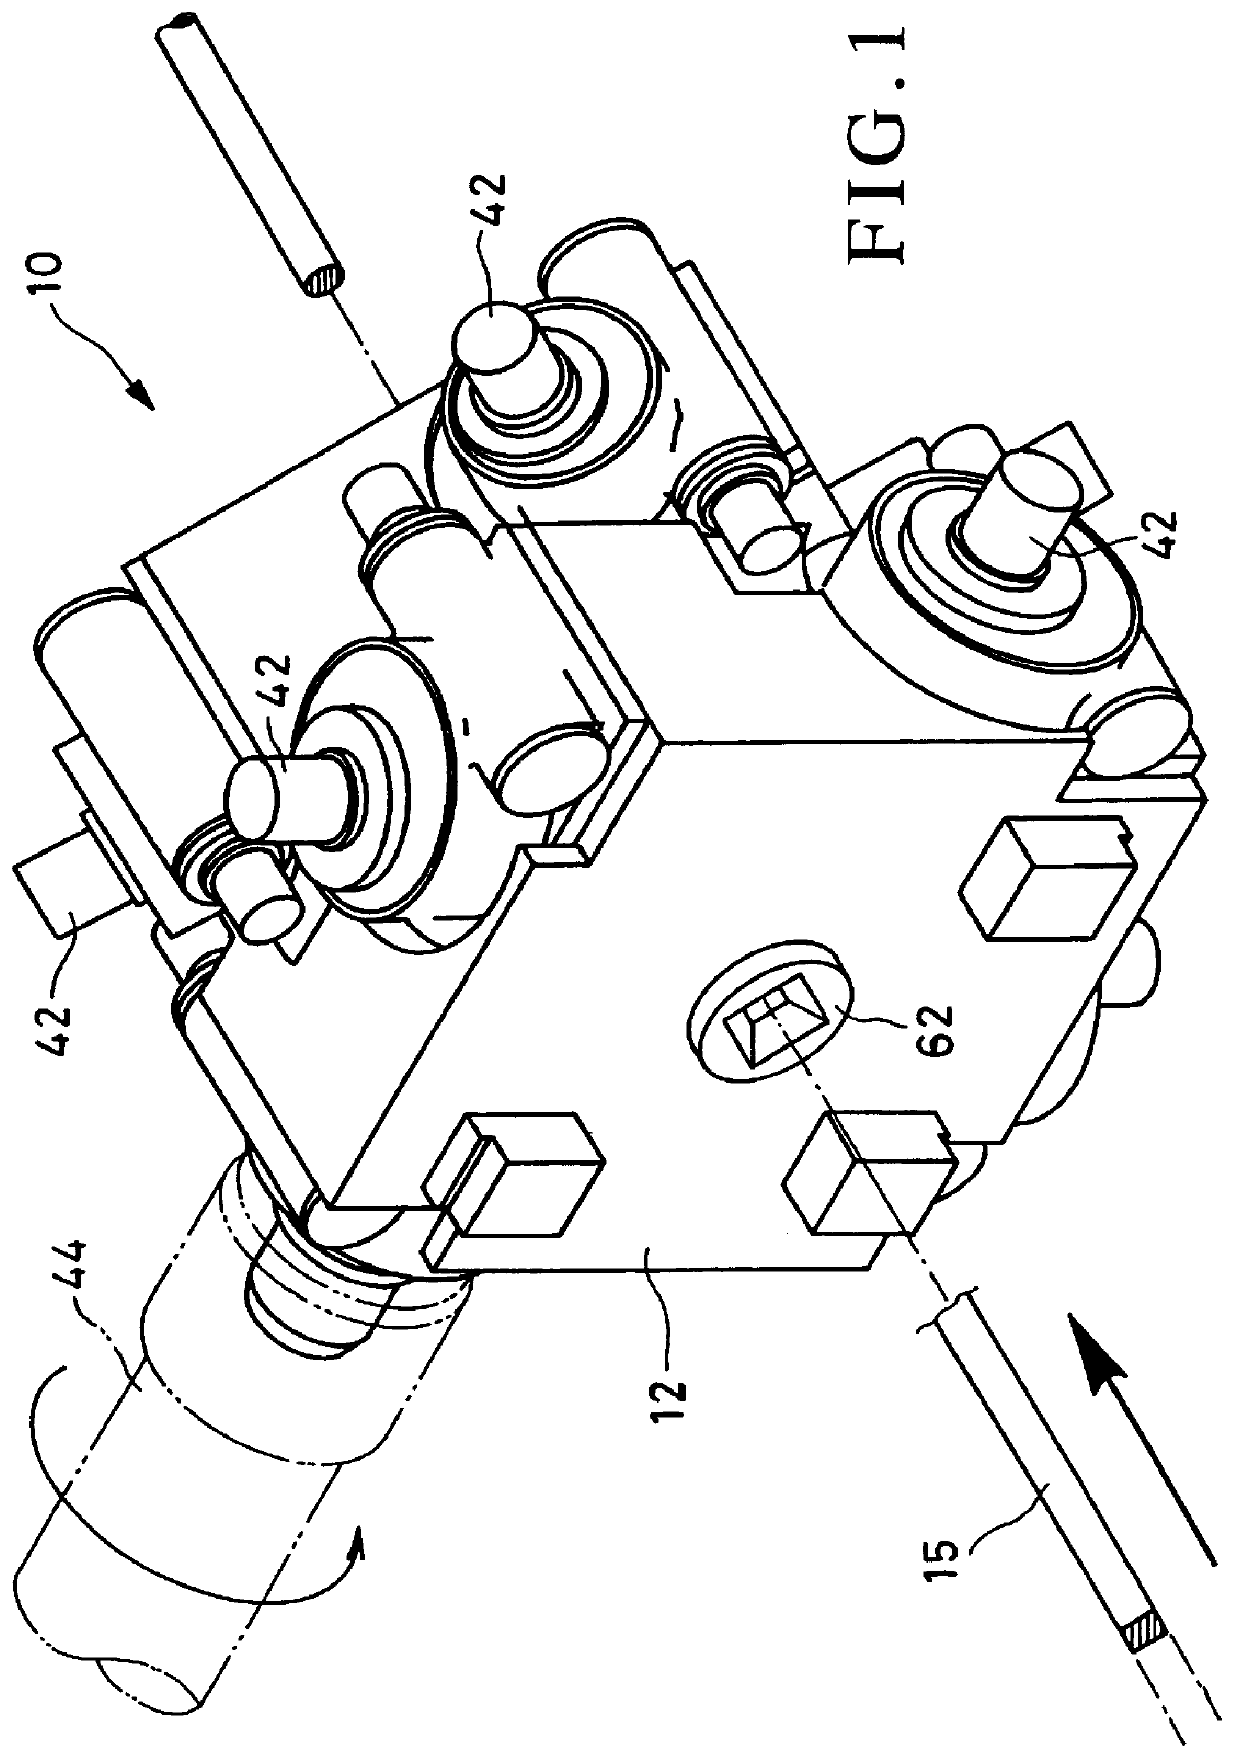 Eight-roller type rolling mill and method of rolling using the mill